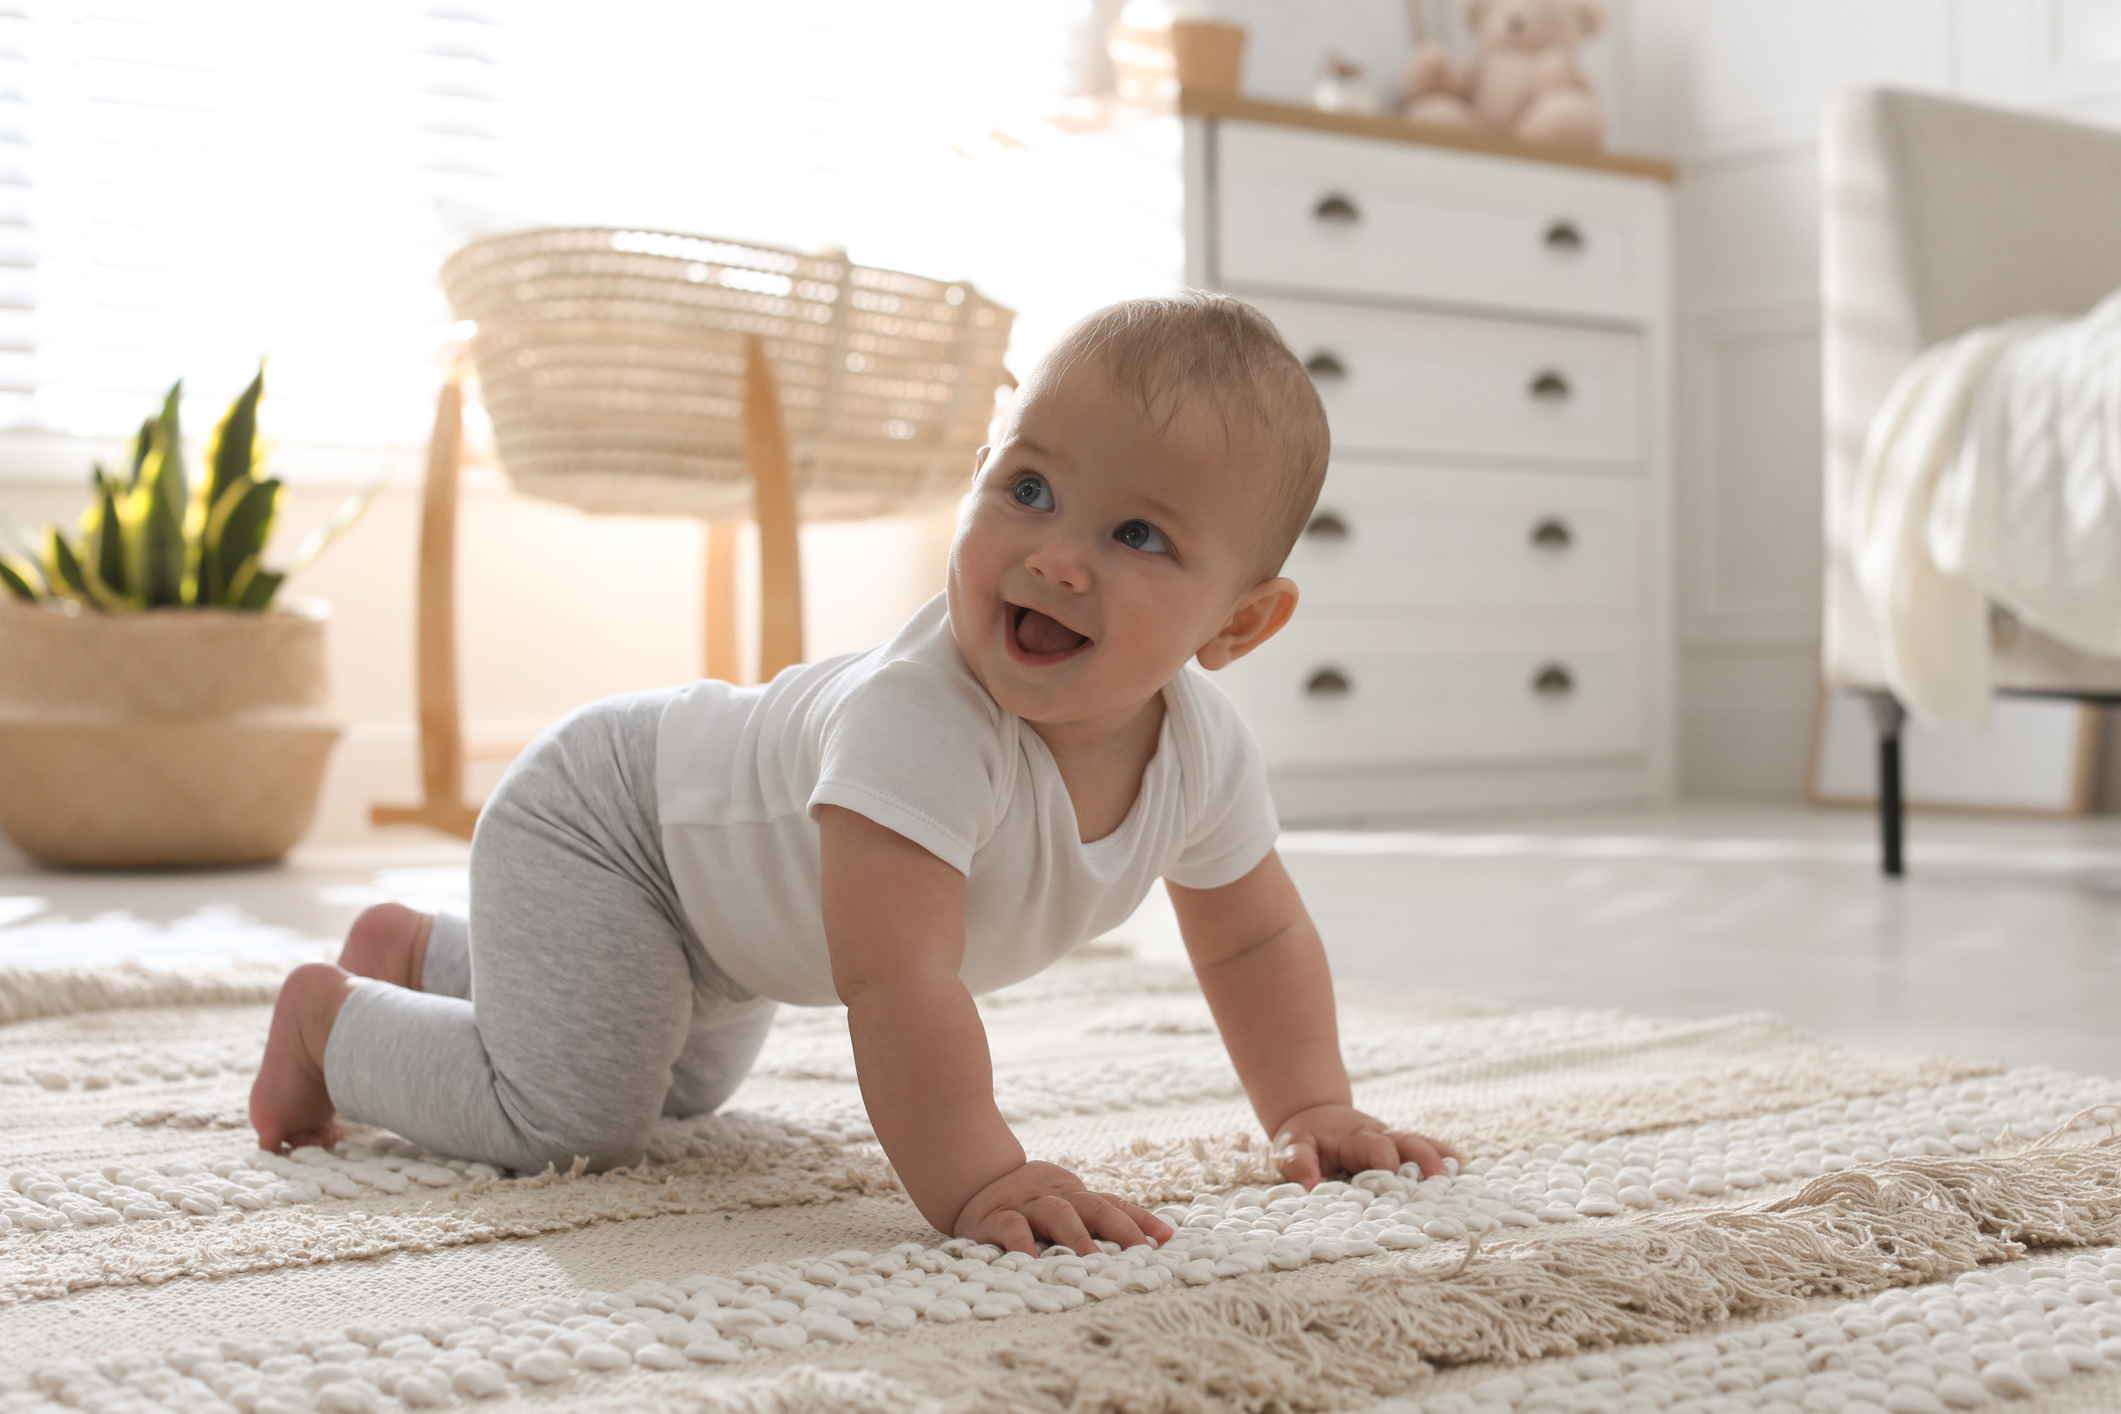 Cute Baby Crawling On Floor At Home